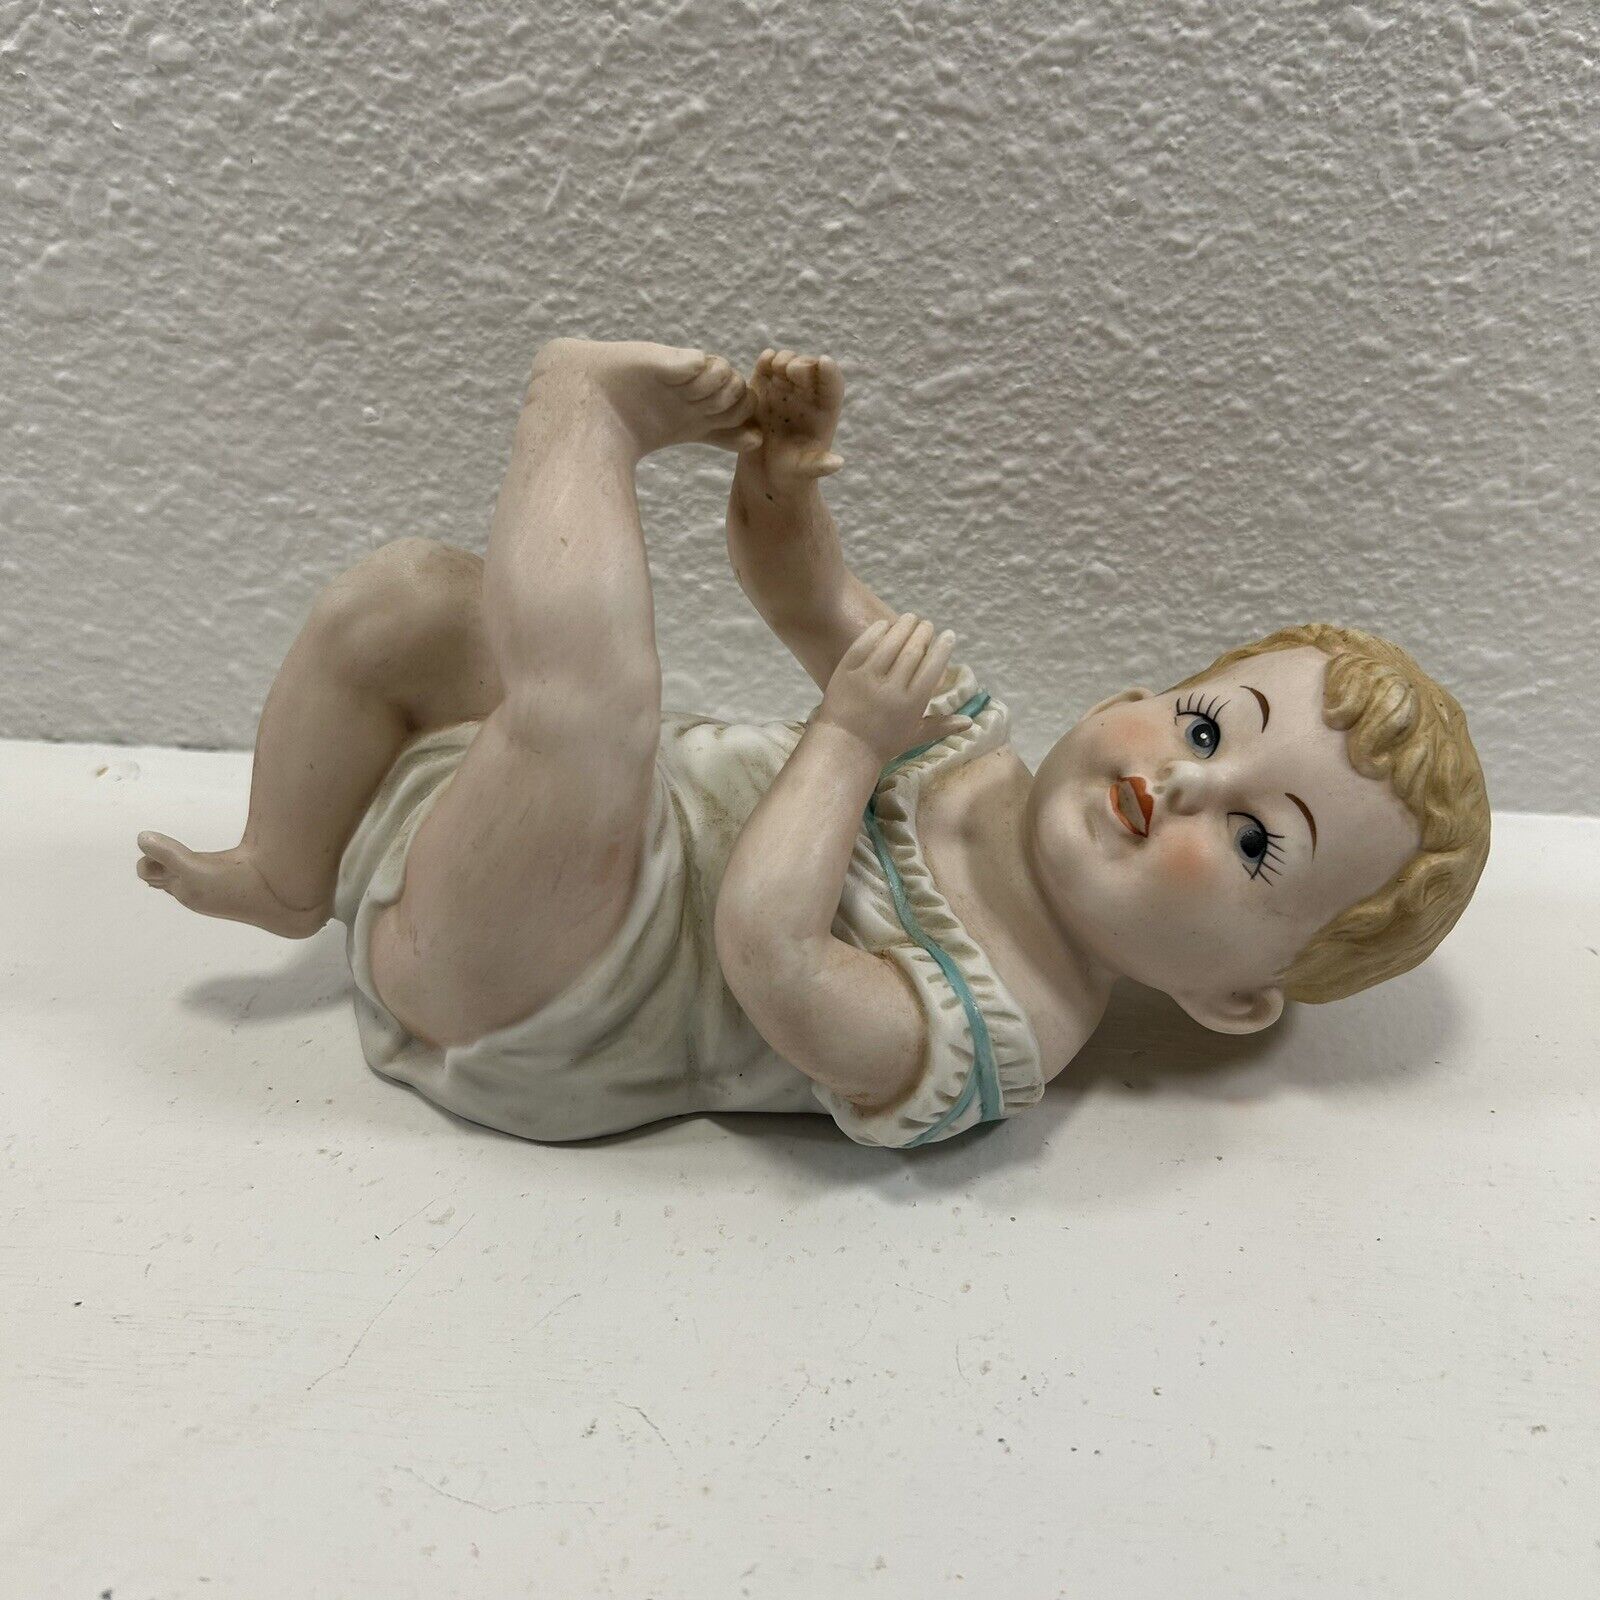 8 in Vintage Bisque Porcelain Piano Baby Boy Figurine Lying Down by Andrea 7536